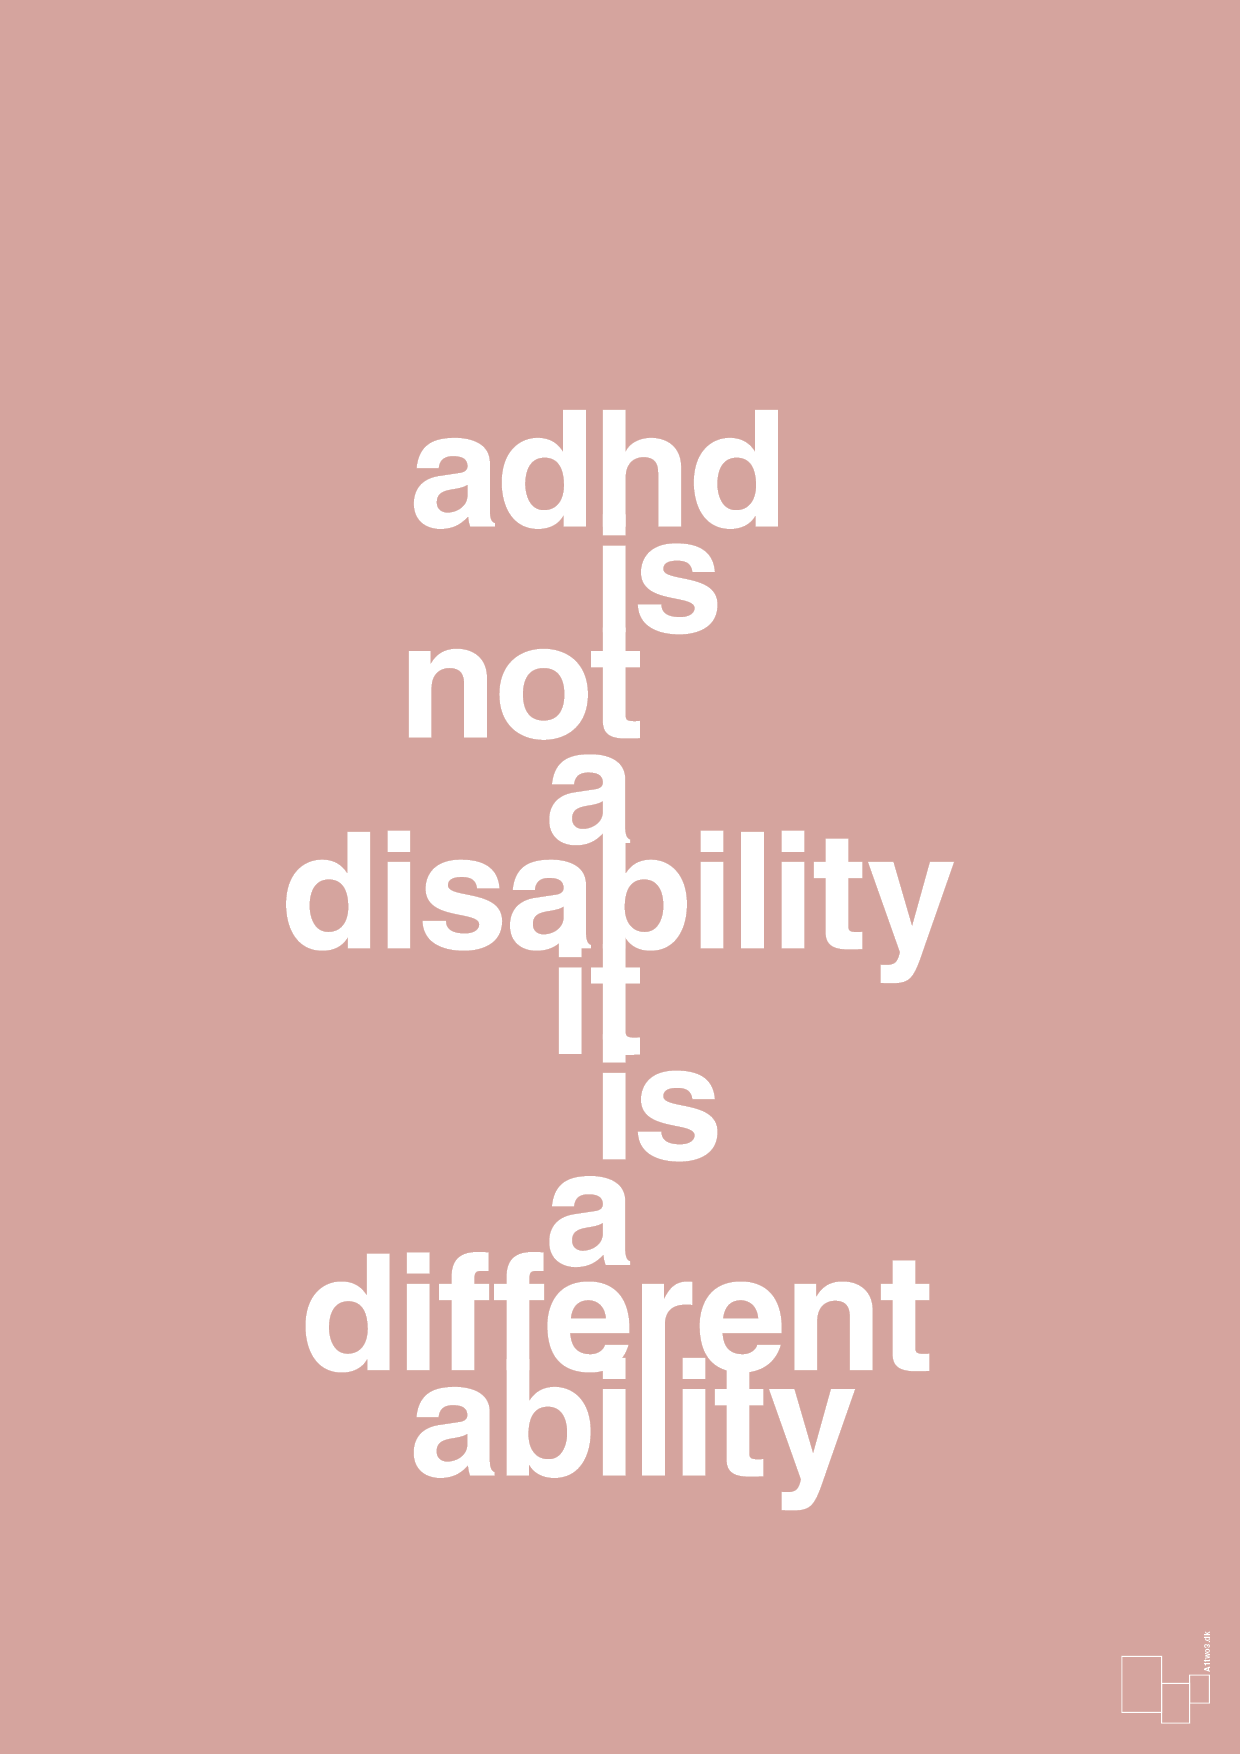 adhd is not a disability it is a different ability - Plakat med Samfund i Bubble Shell